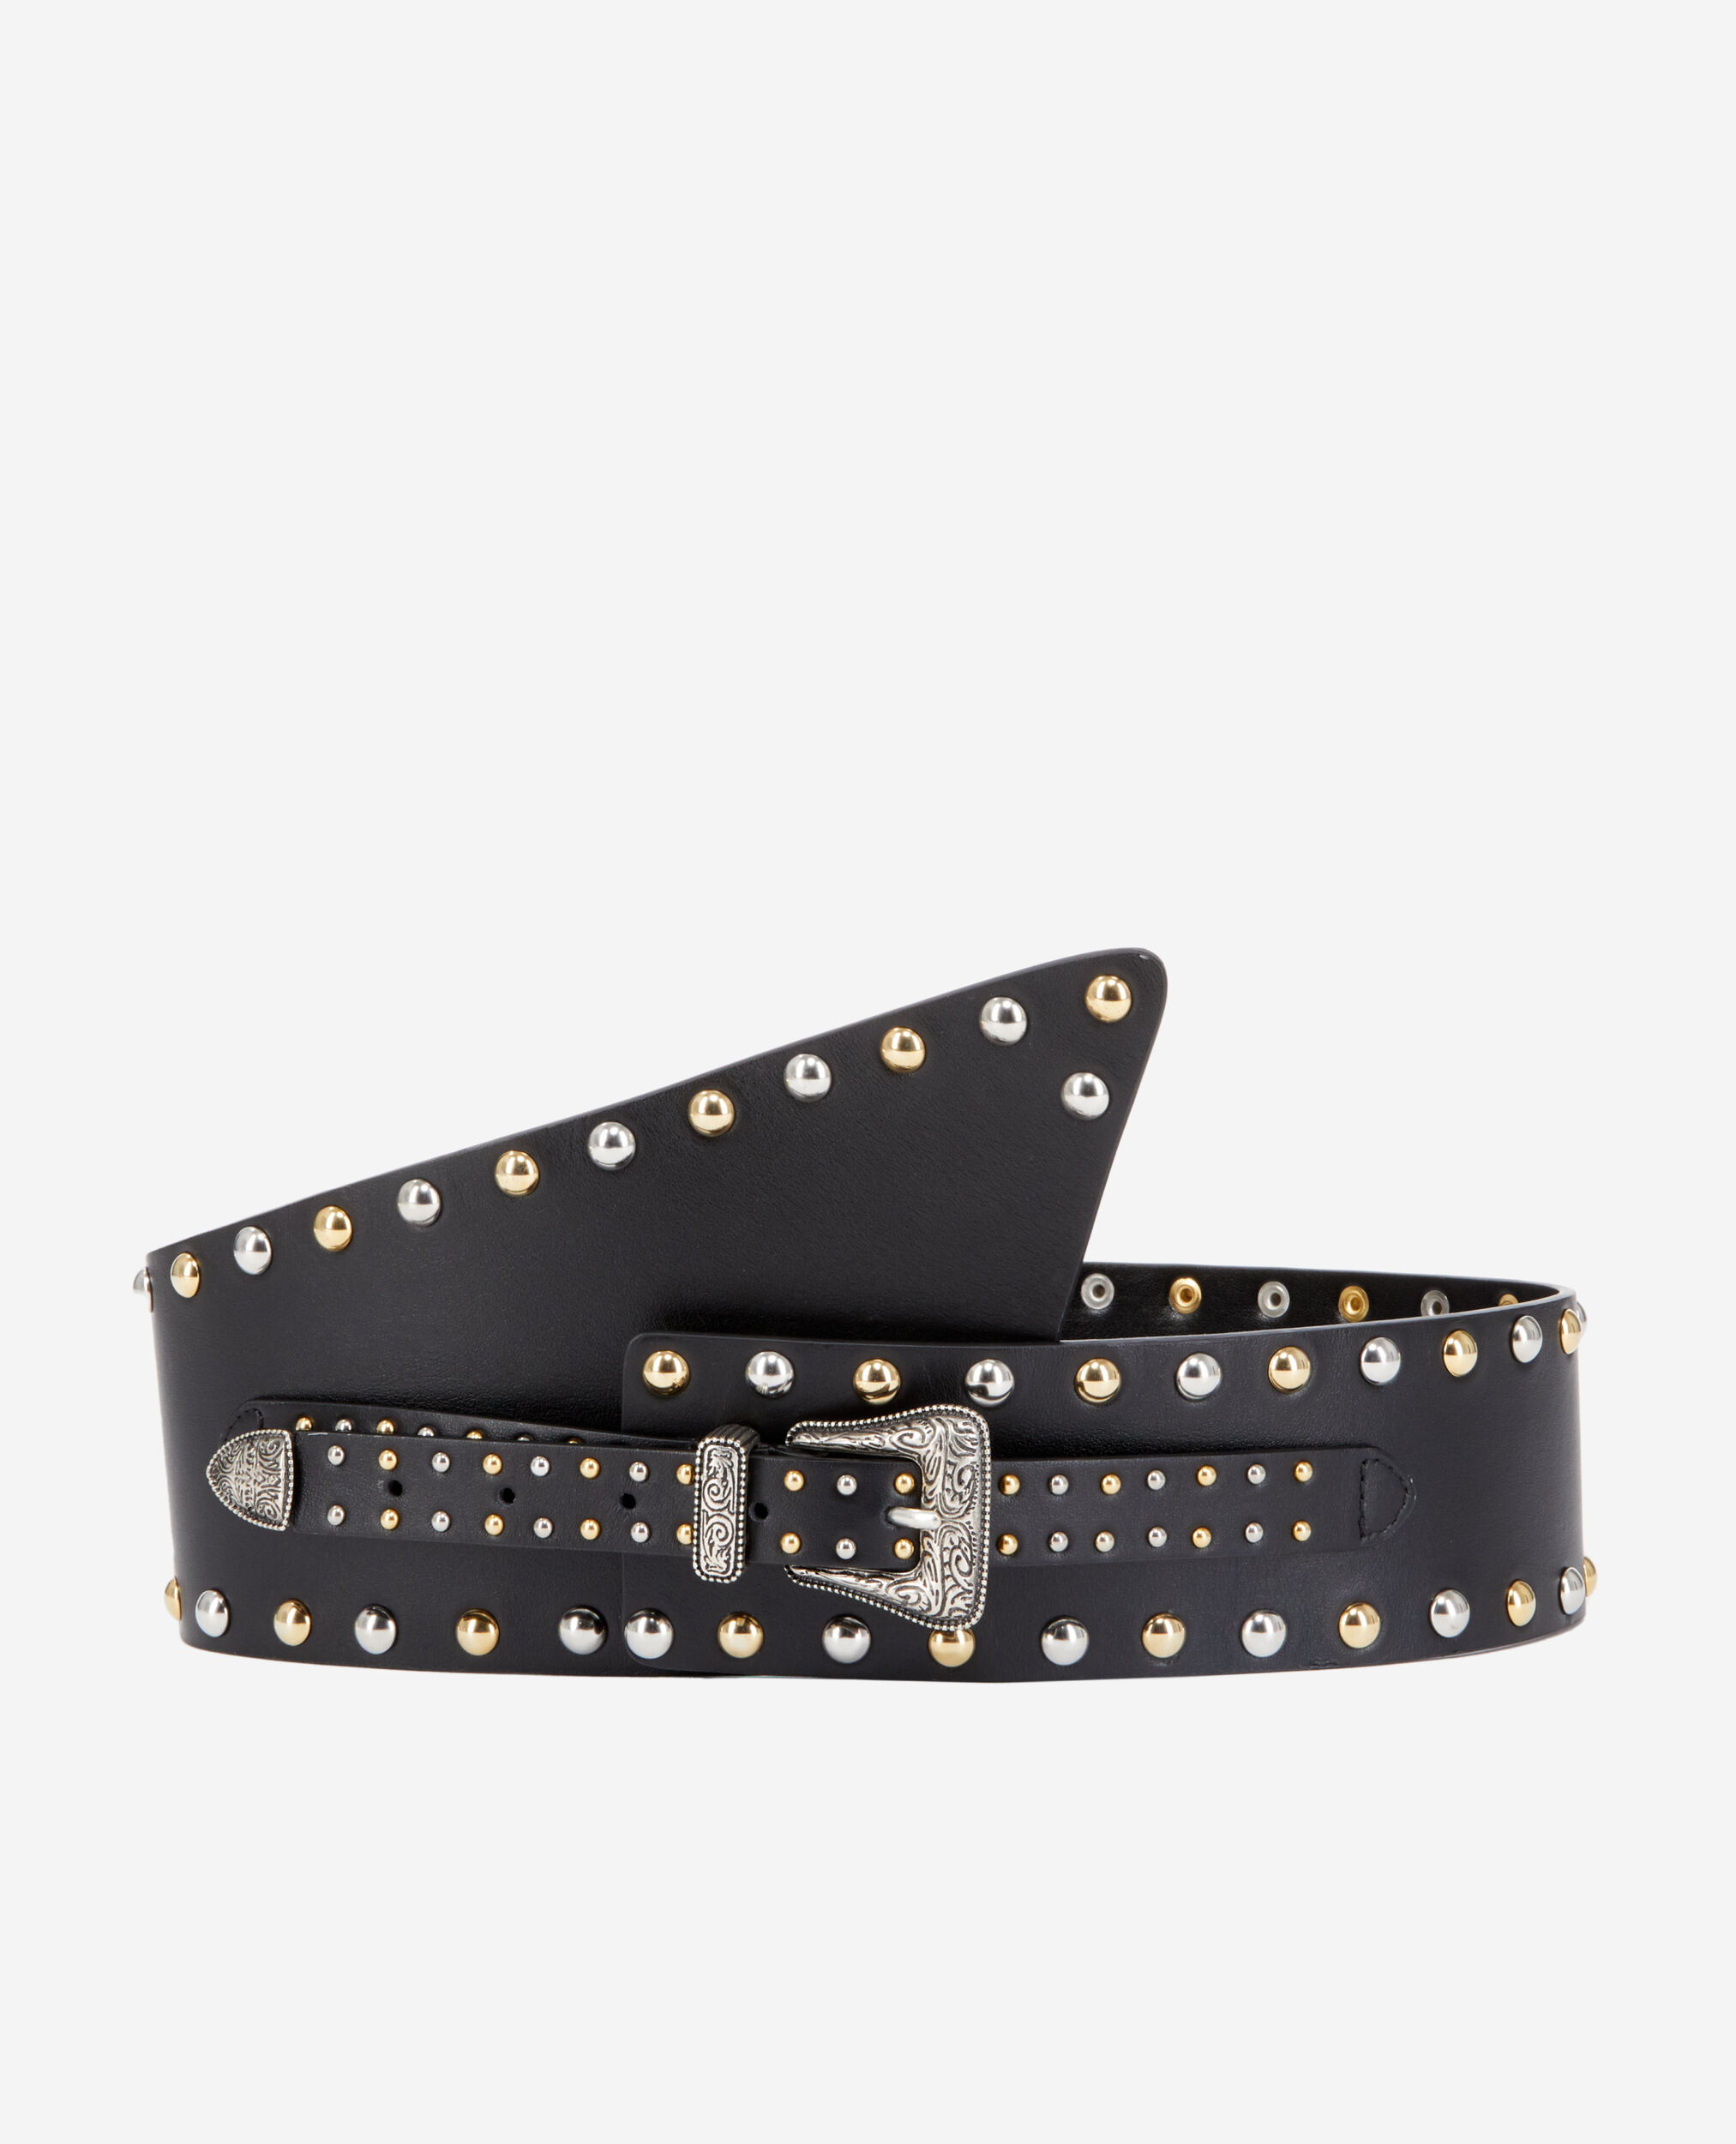 Wide black leather belt with studs and Western buckle, BLACK, hi-res image number null